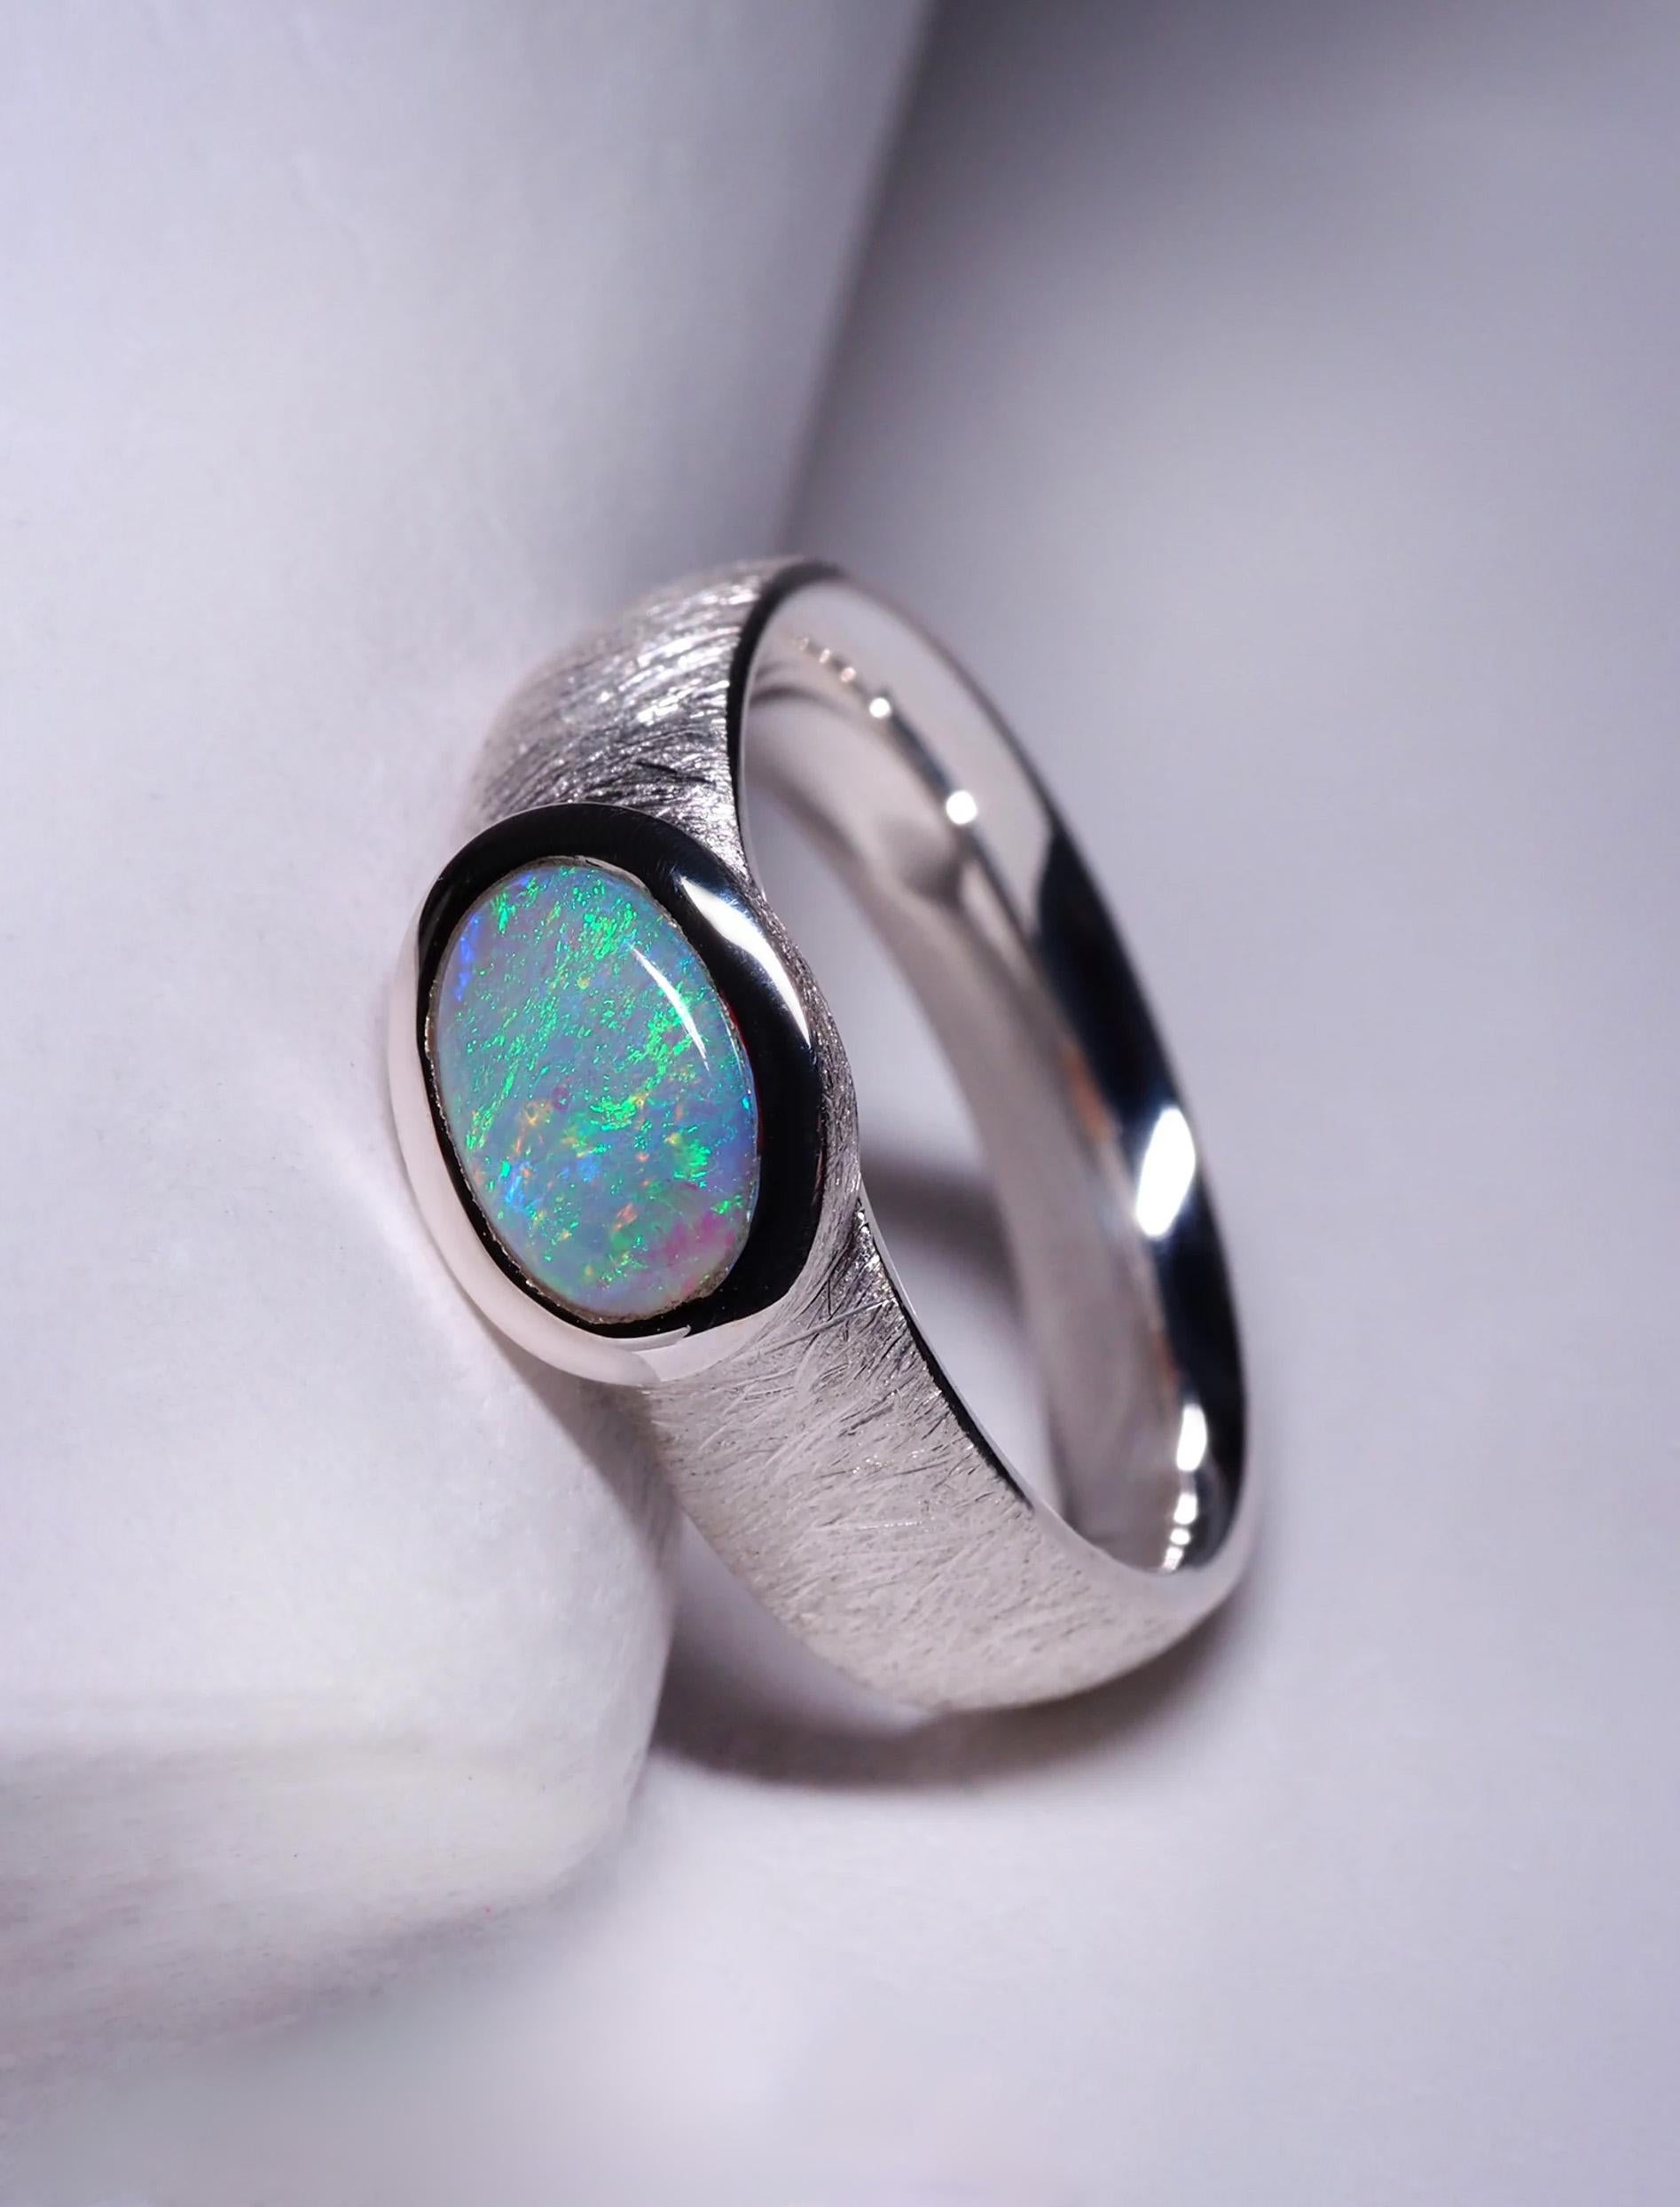 Matte finish silver ring with natural Opal 
gemstone origin - Australia
opal measurements - 0.24 x 0.35 in / 6 х 9 mm
opal weight - 1 carats
ring size - 6 3/4 US
ring weight - 5.11 grams